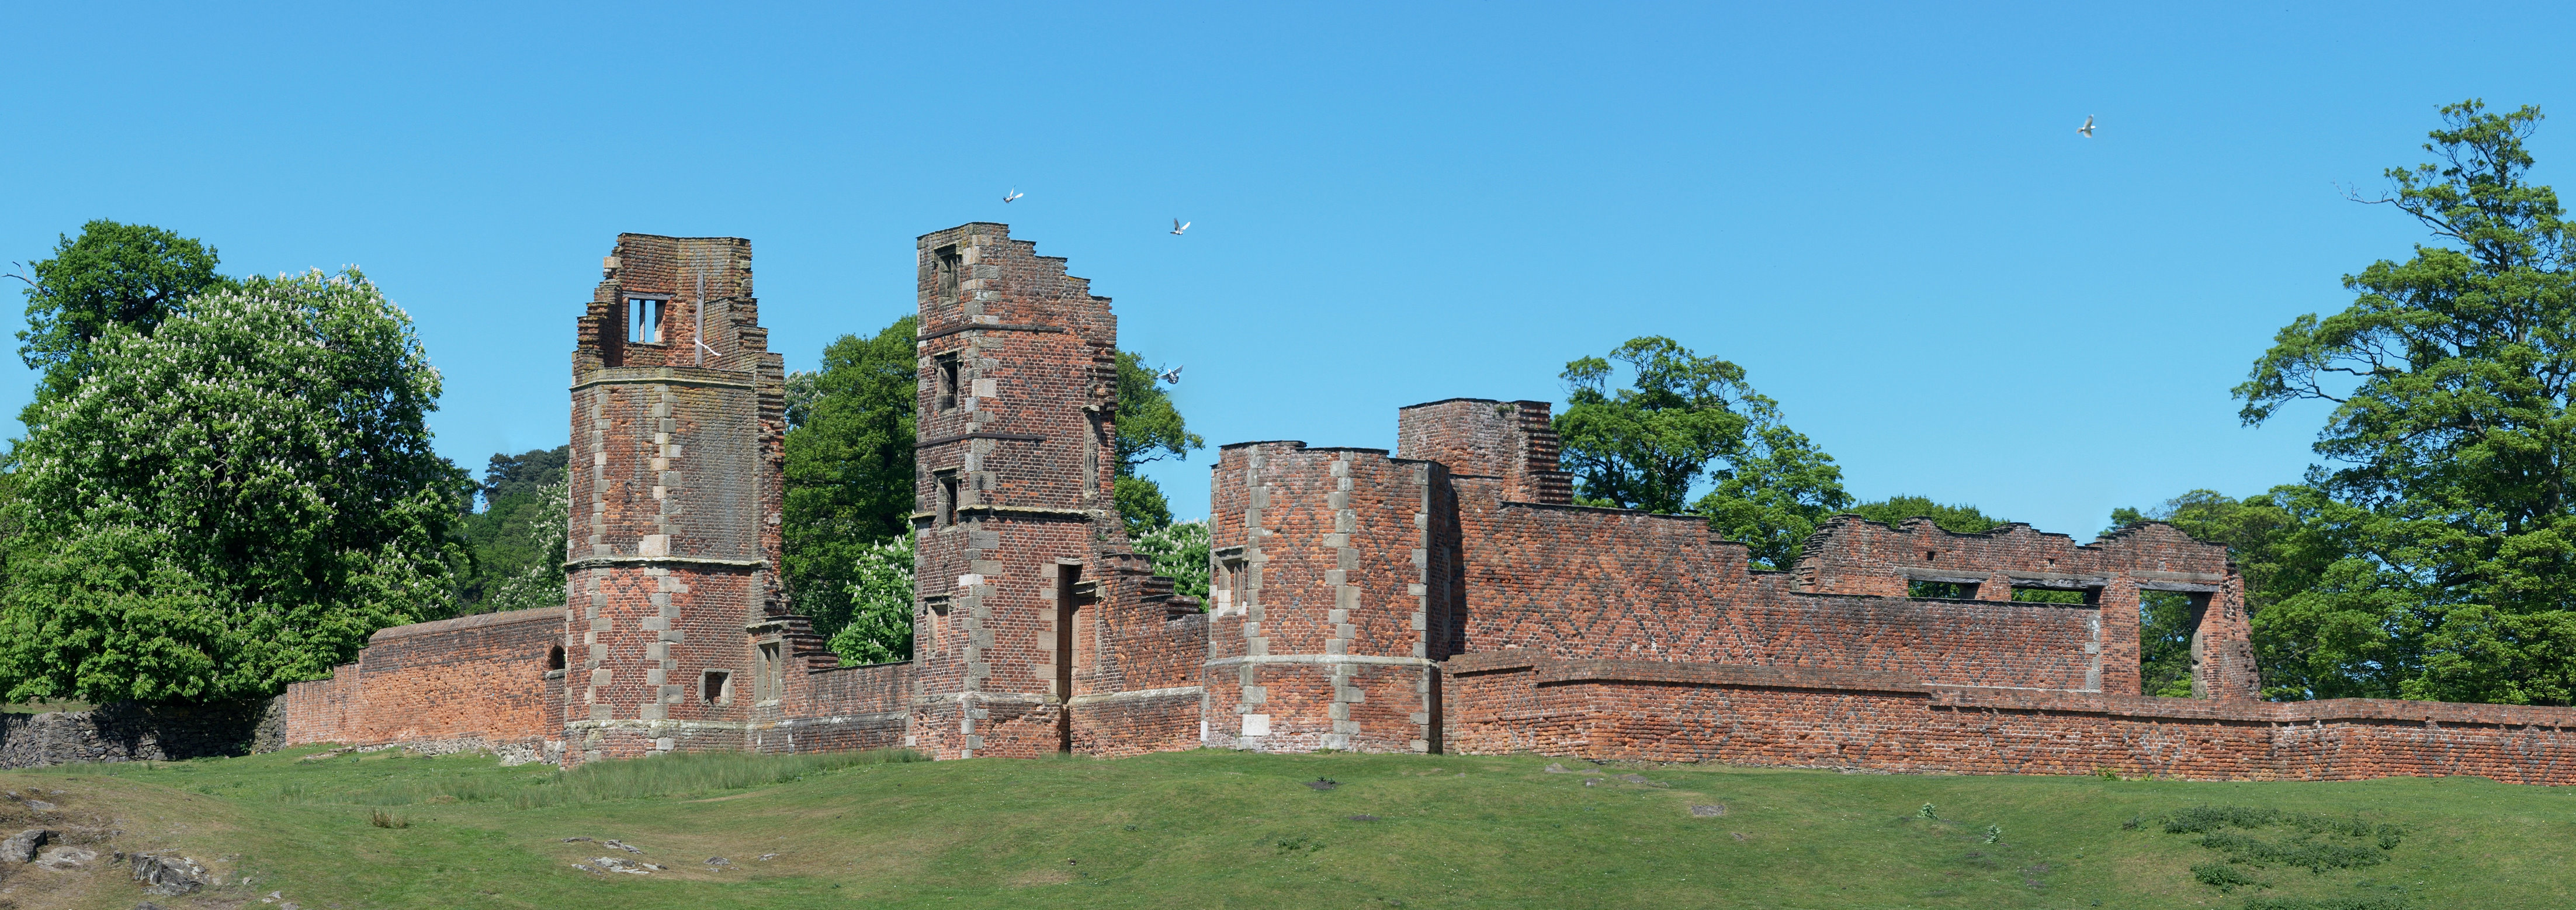 Bradgate House, By NotFromUtrecht - Own work, CC BY-SA 3.0